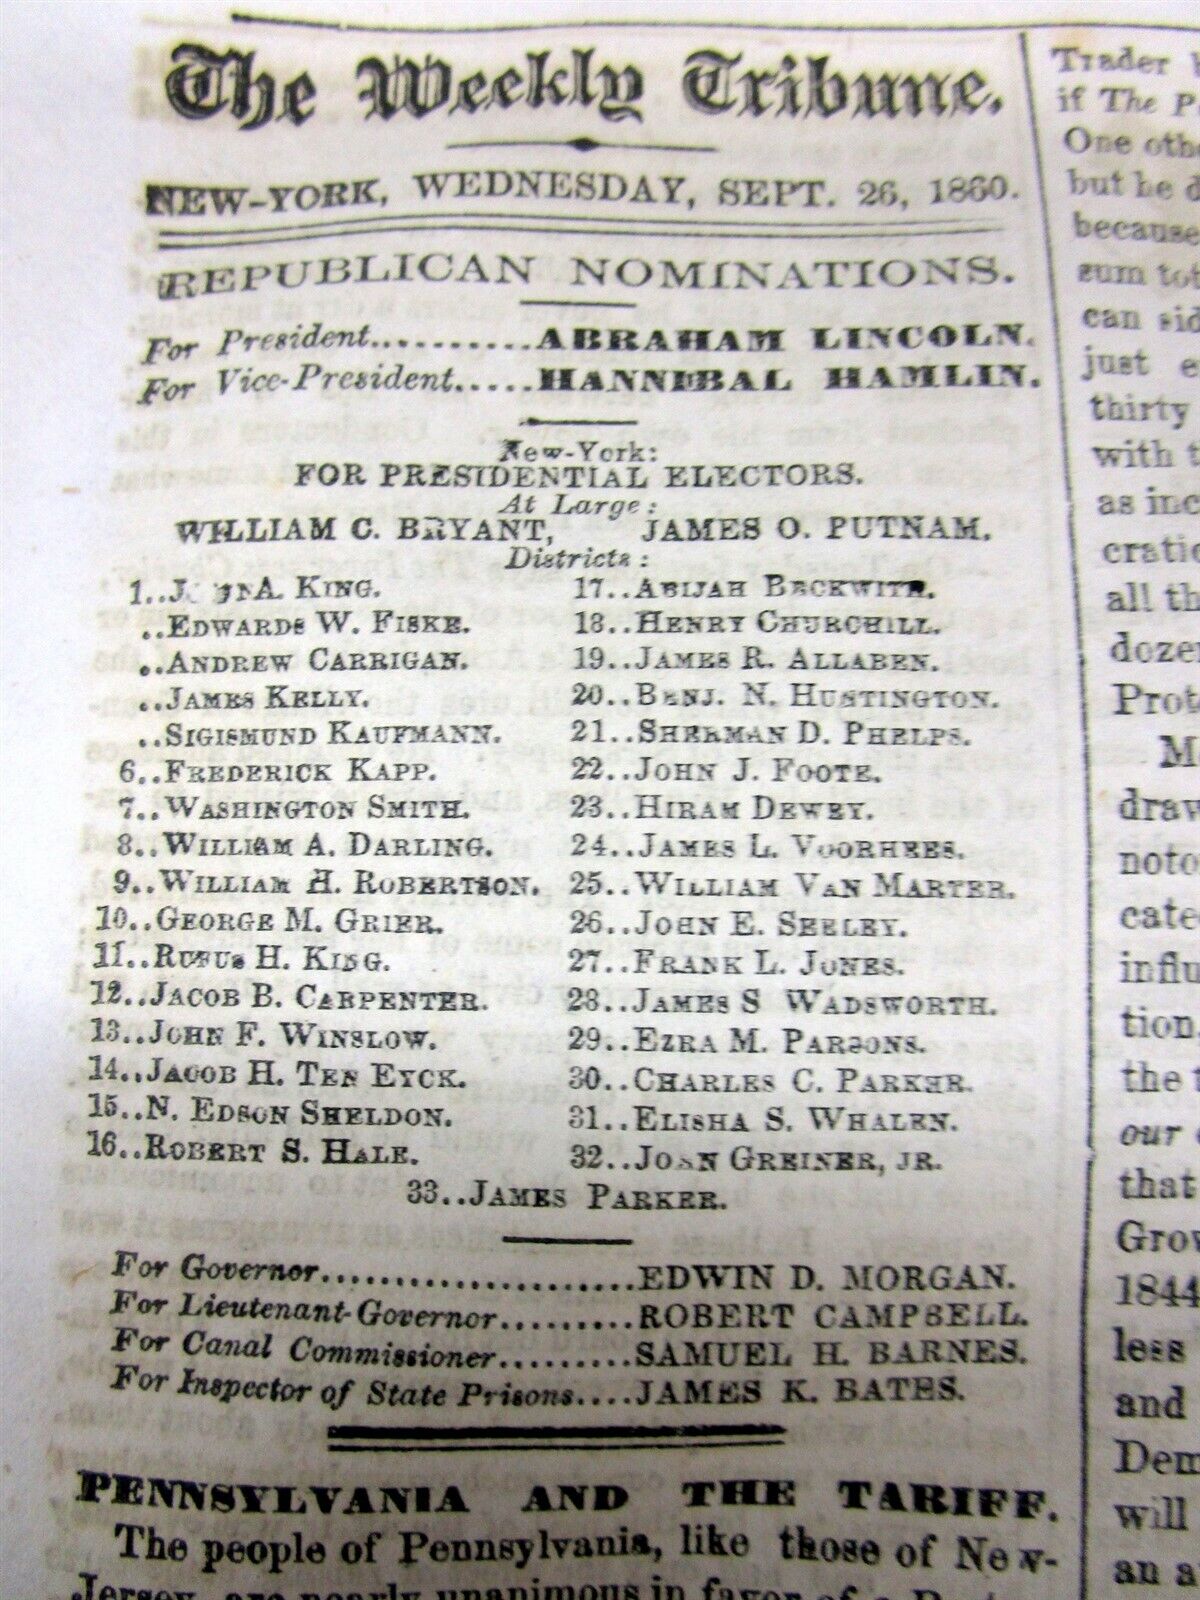 1860 NYC newspaper wth ad supporting Republican ABRAHAM LINCOLN for US PRESIDENT